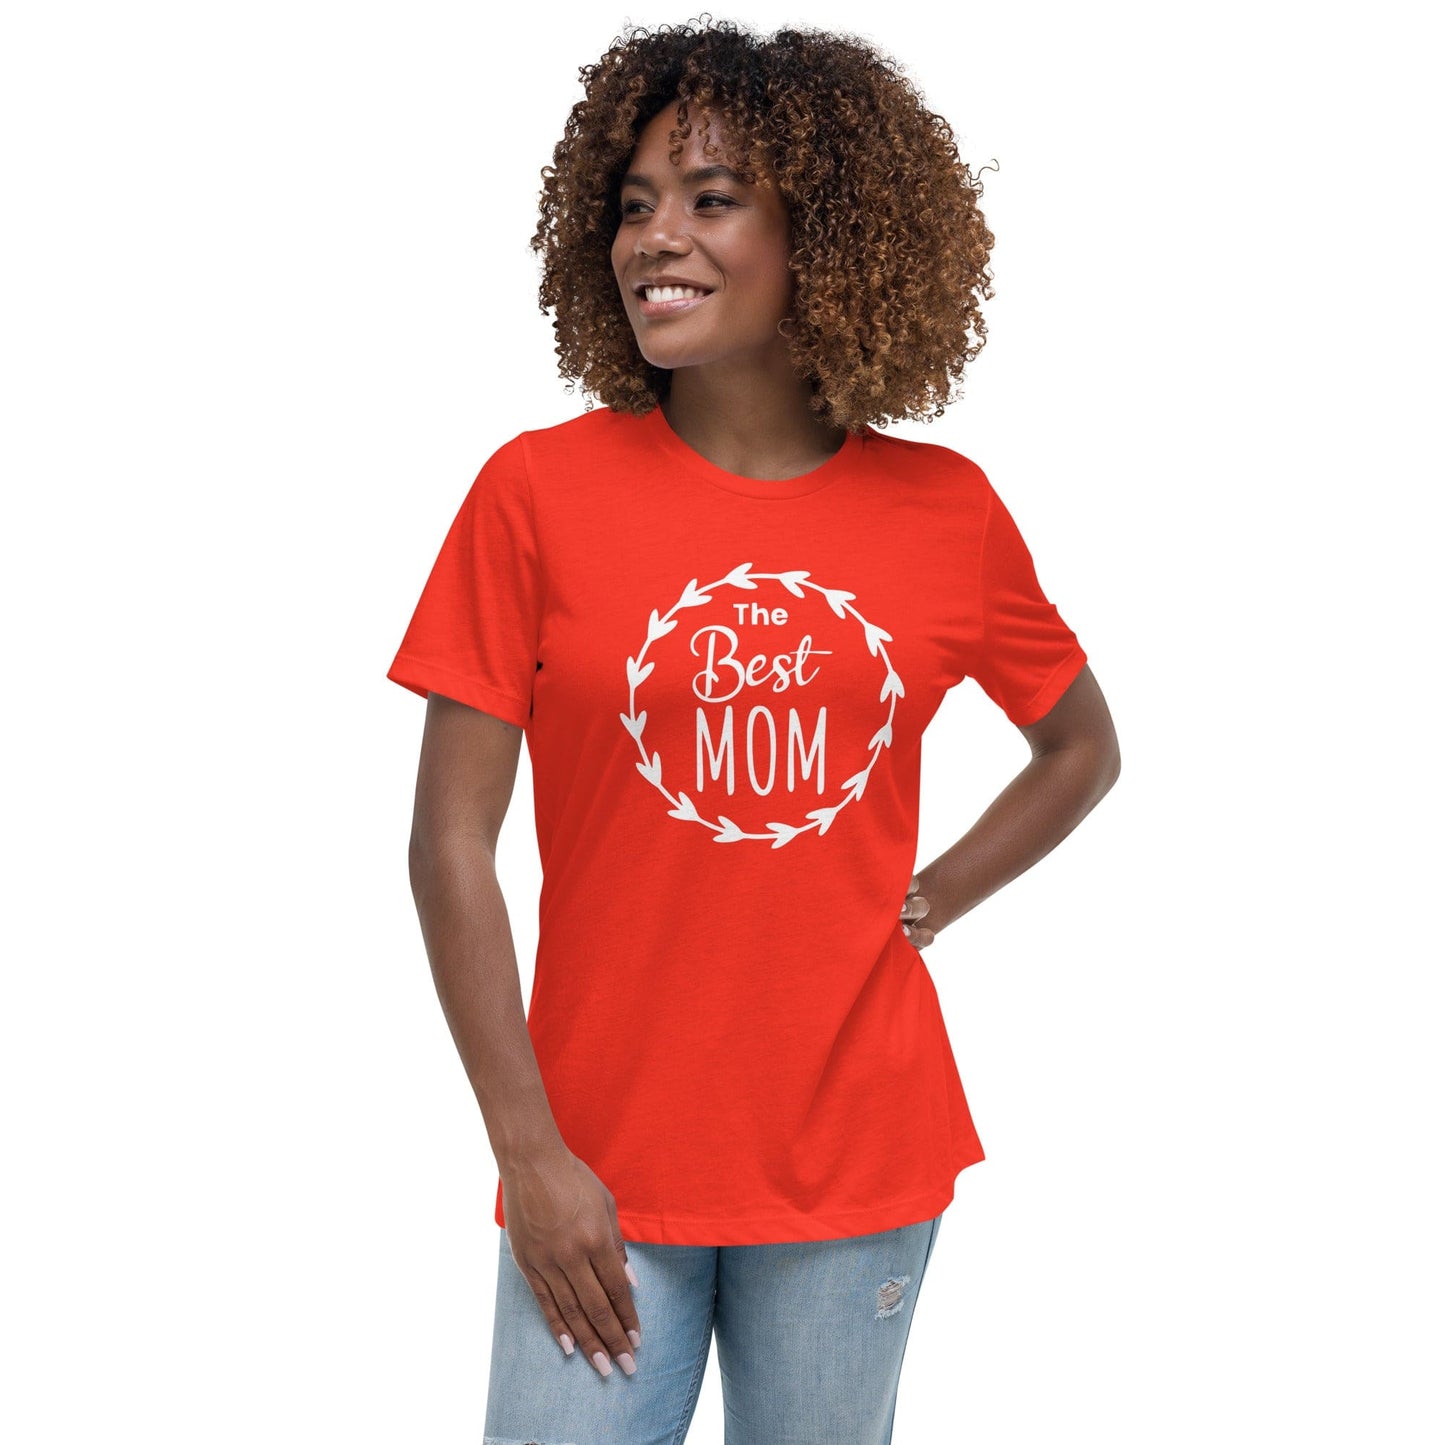 The Best Mom T-Shirt